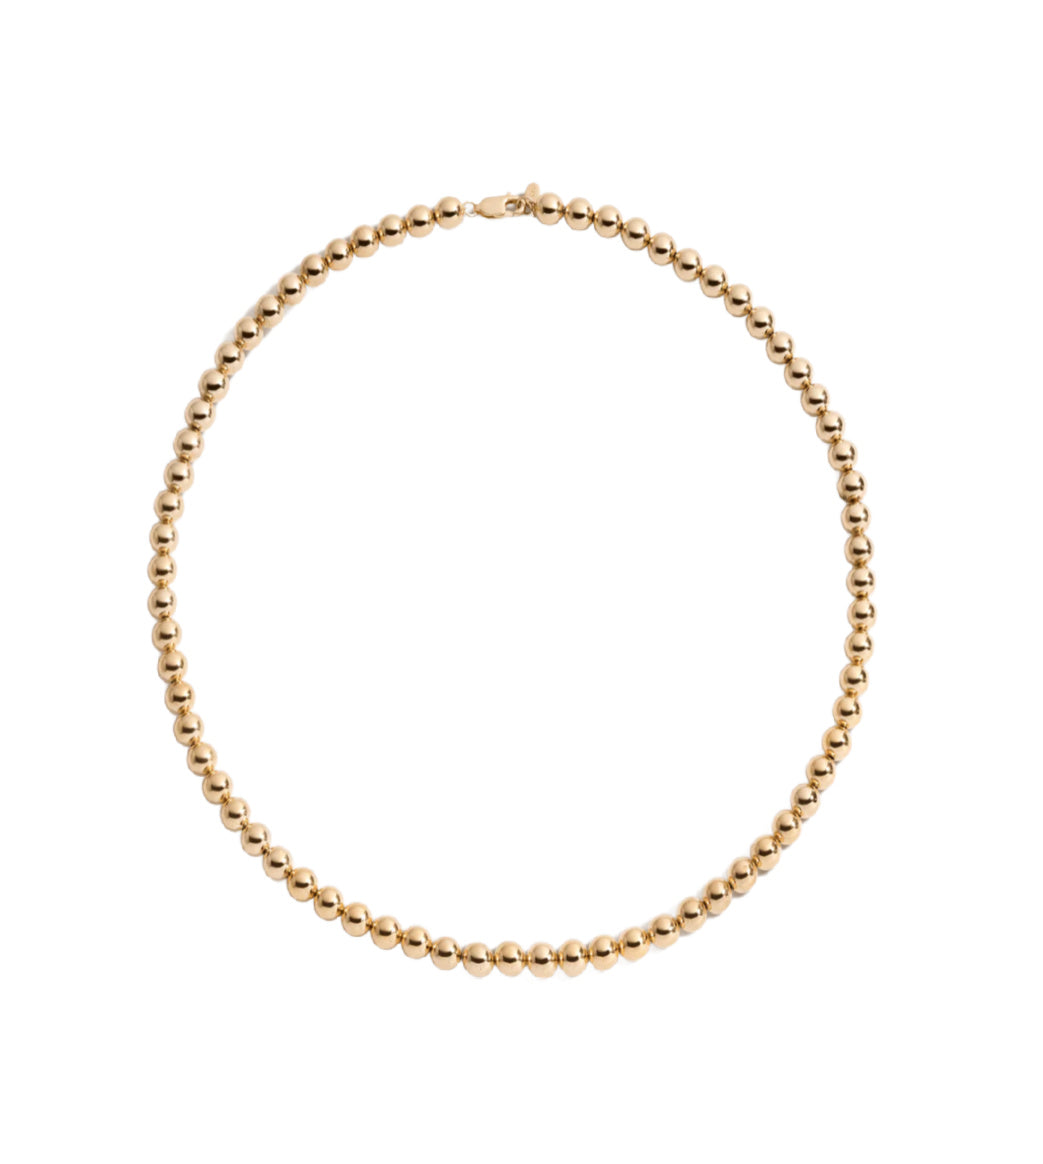 Stainless Gold Ball Chain